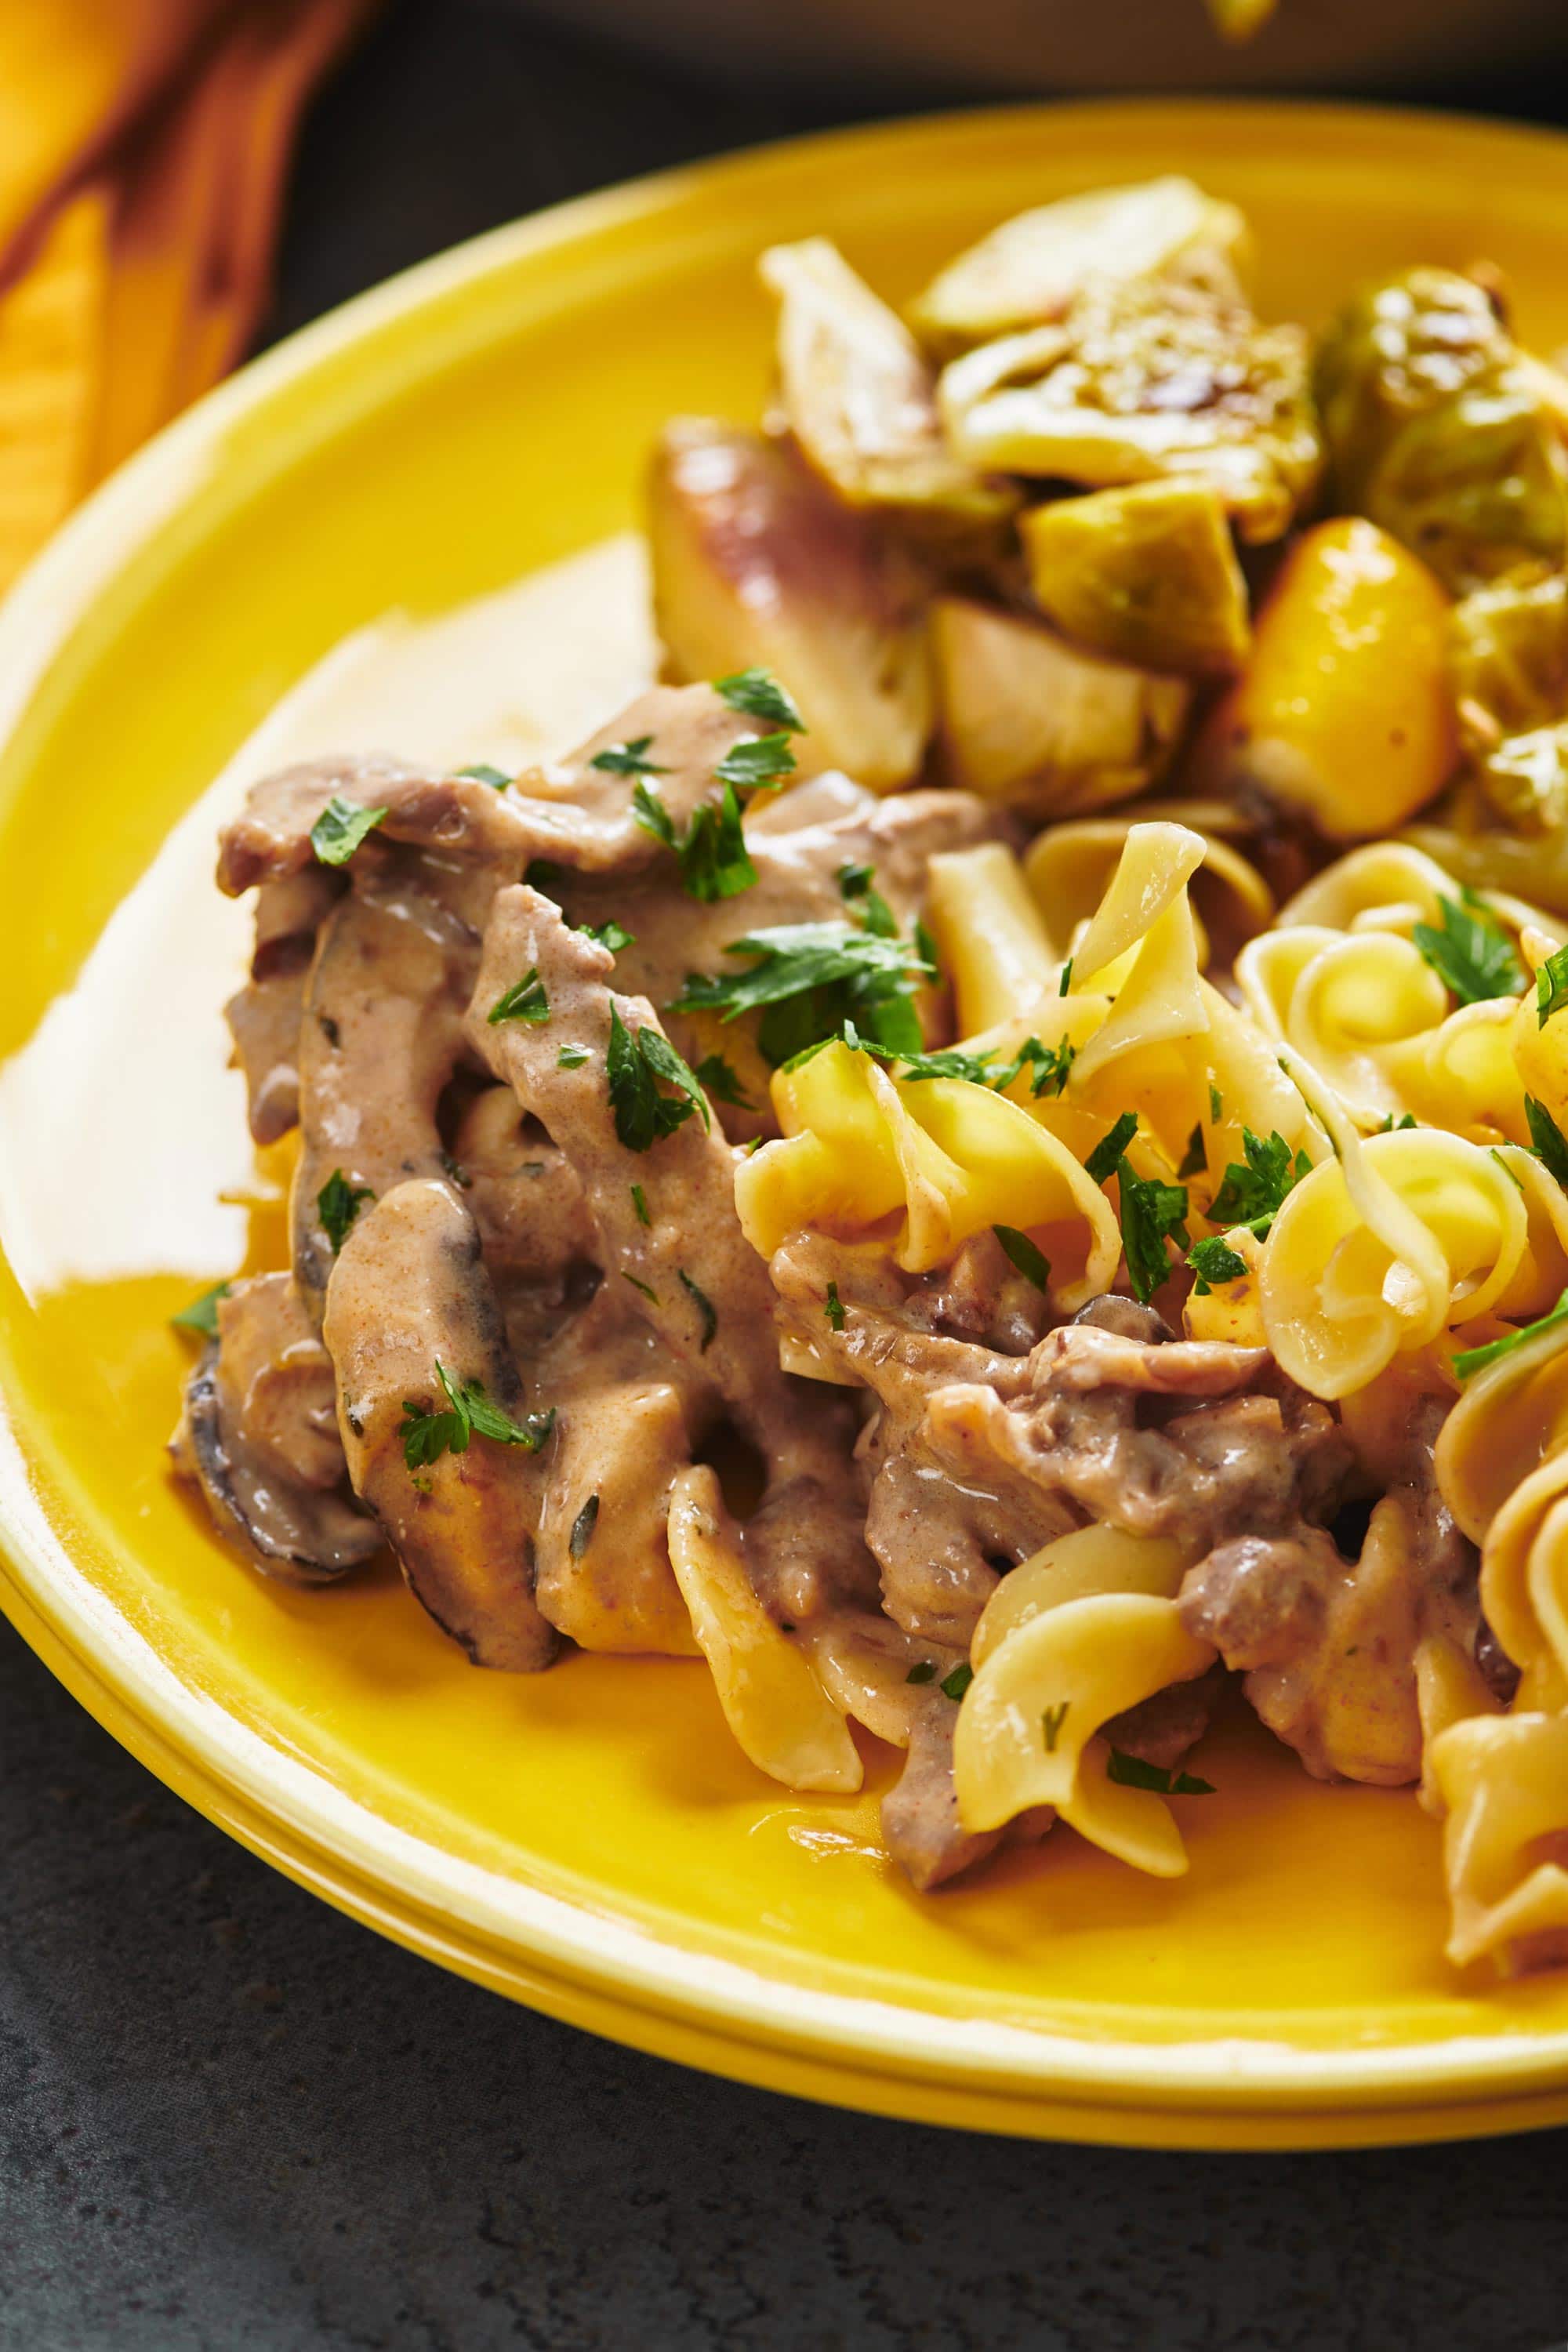 Beef Stroganoff and noddles on a yellow plate.